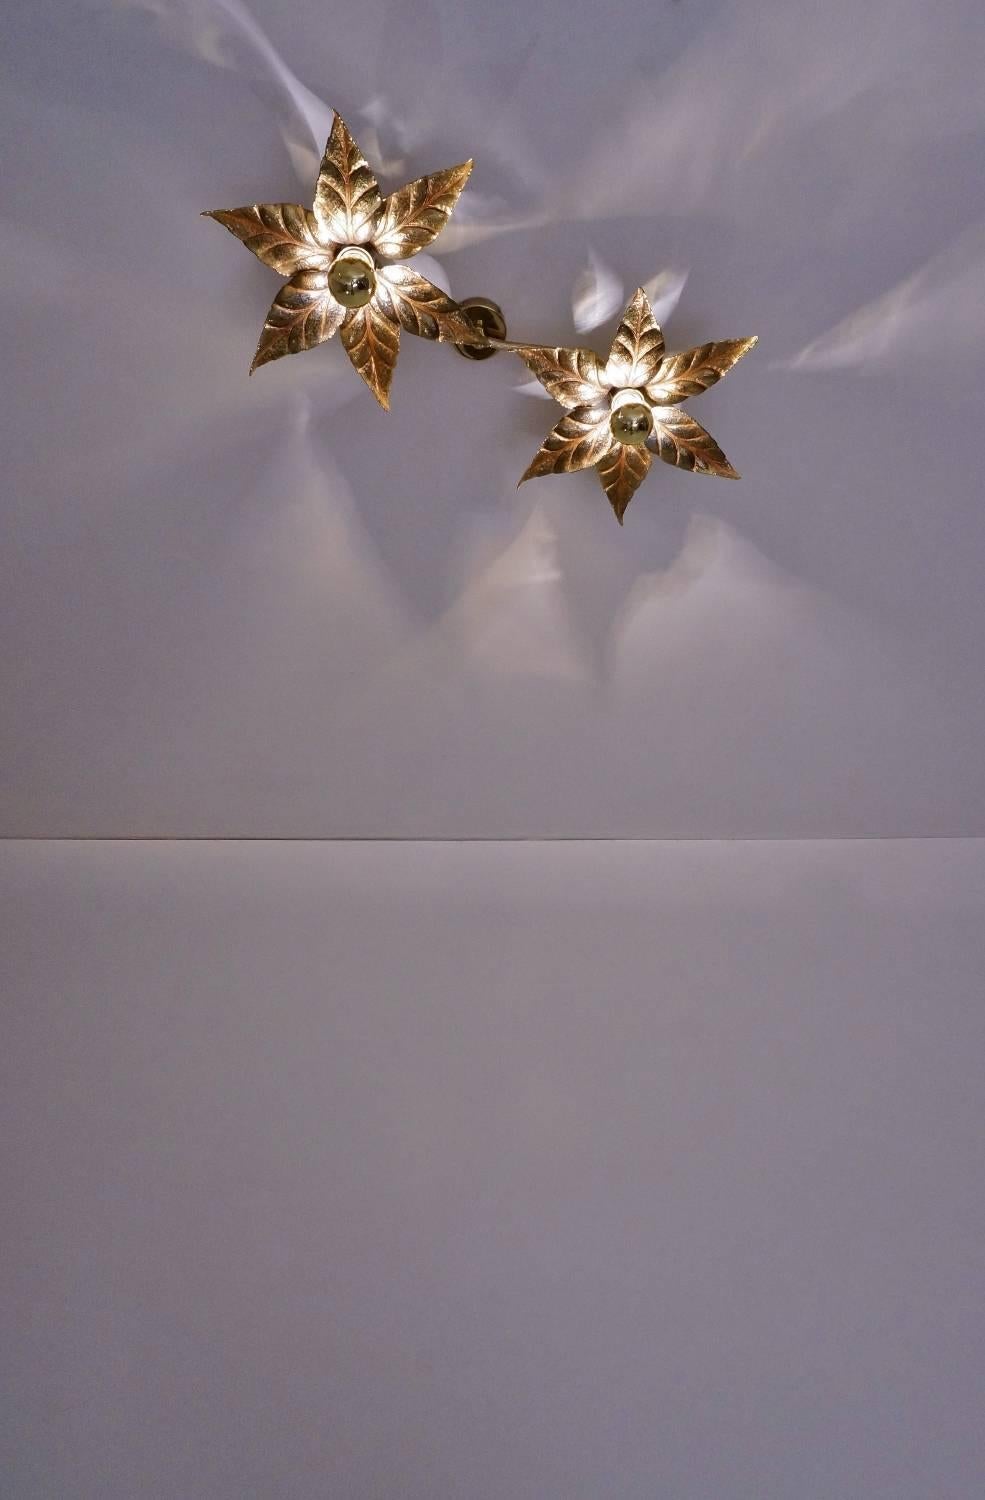 Brass flowers ceiling or wall light in the style of designer Willy Daro manufactured by 'Massive Lighting,' circa 1970s, Belgian.

Thoroughly cleaned respecting the antique patina, newly rewired and earthed, in full working order and ready to use.